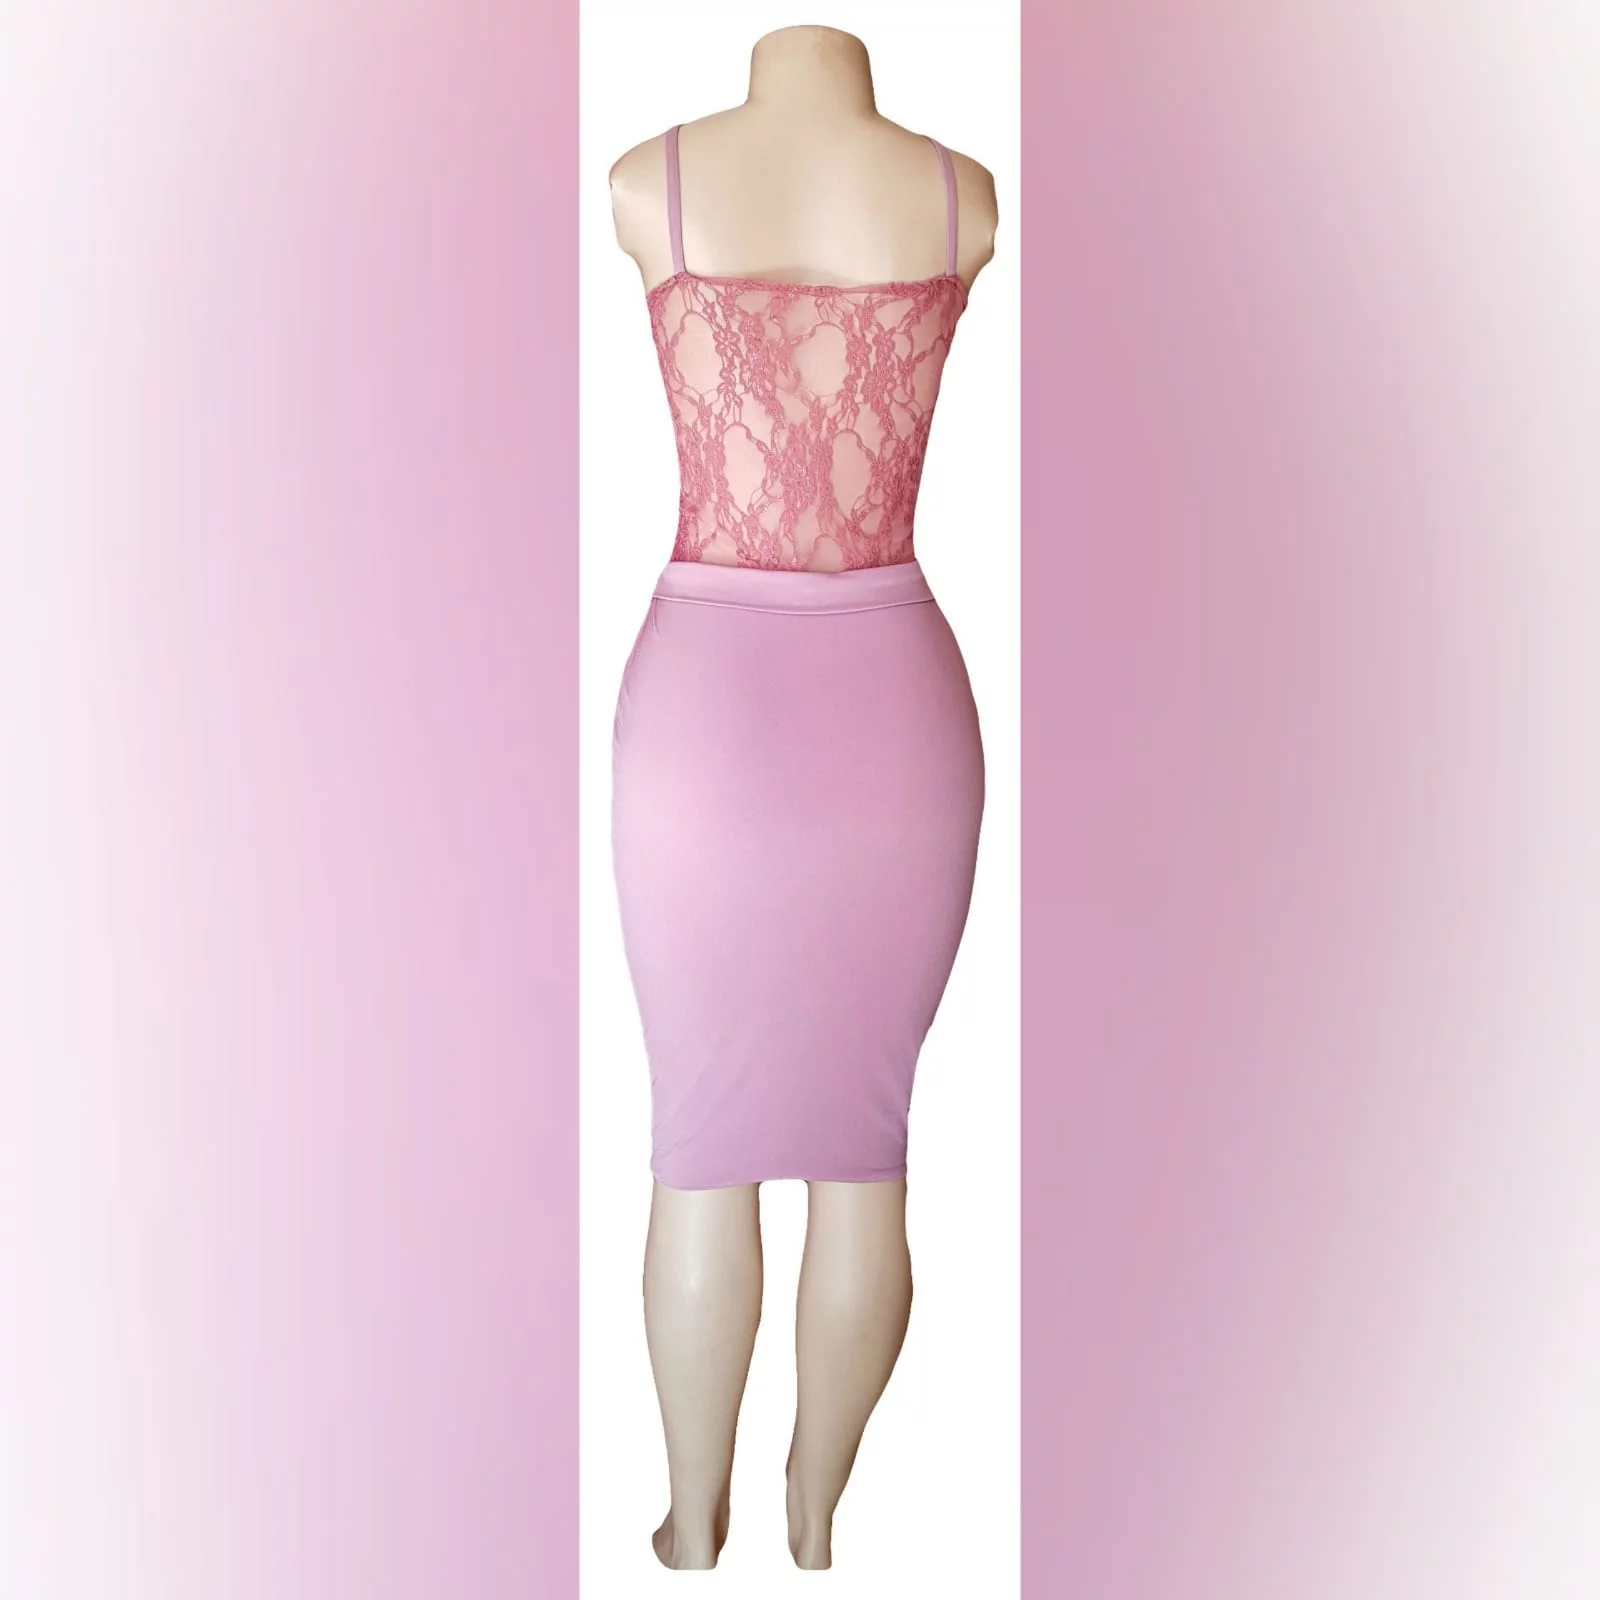 Knee length pink fitted smart casual dress 3 knee length pink fitted smart casual dress with a sheer lace bodice with a waistband and shoulder straps.